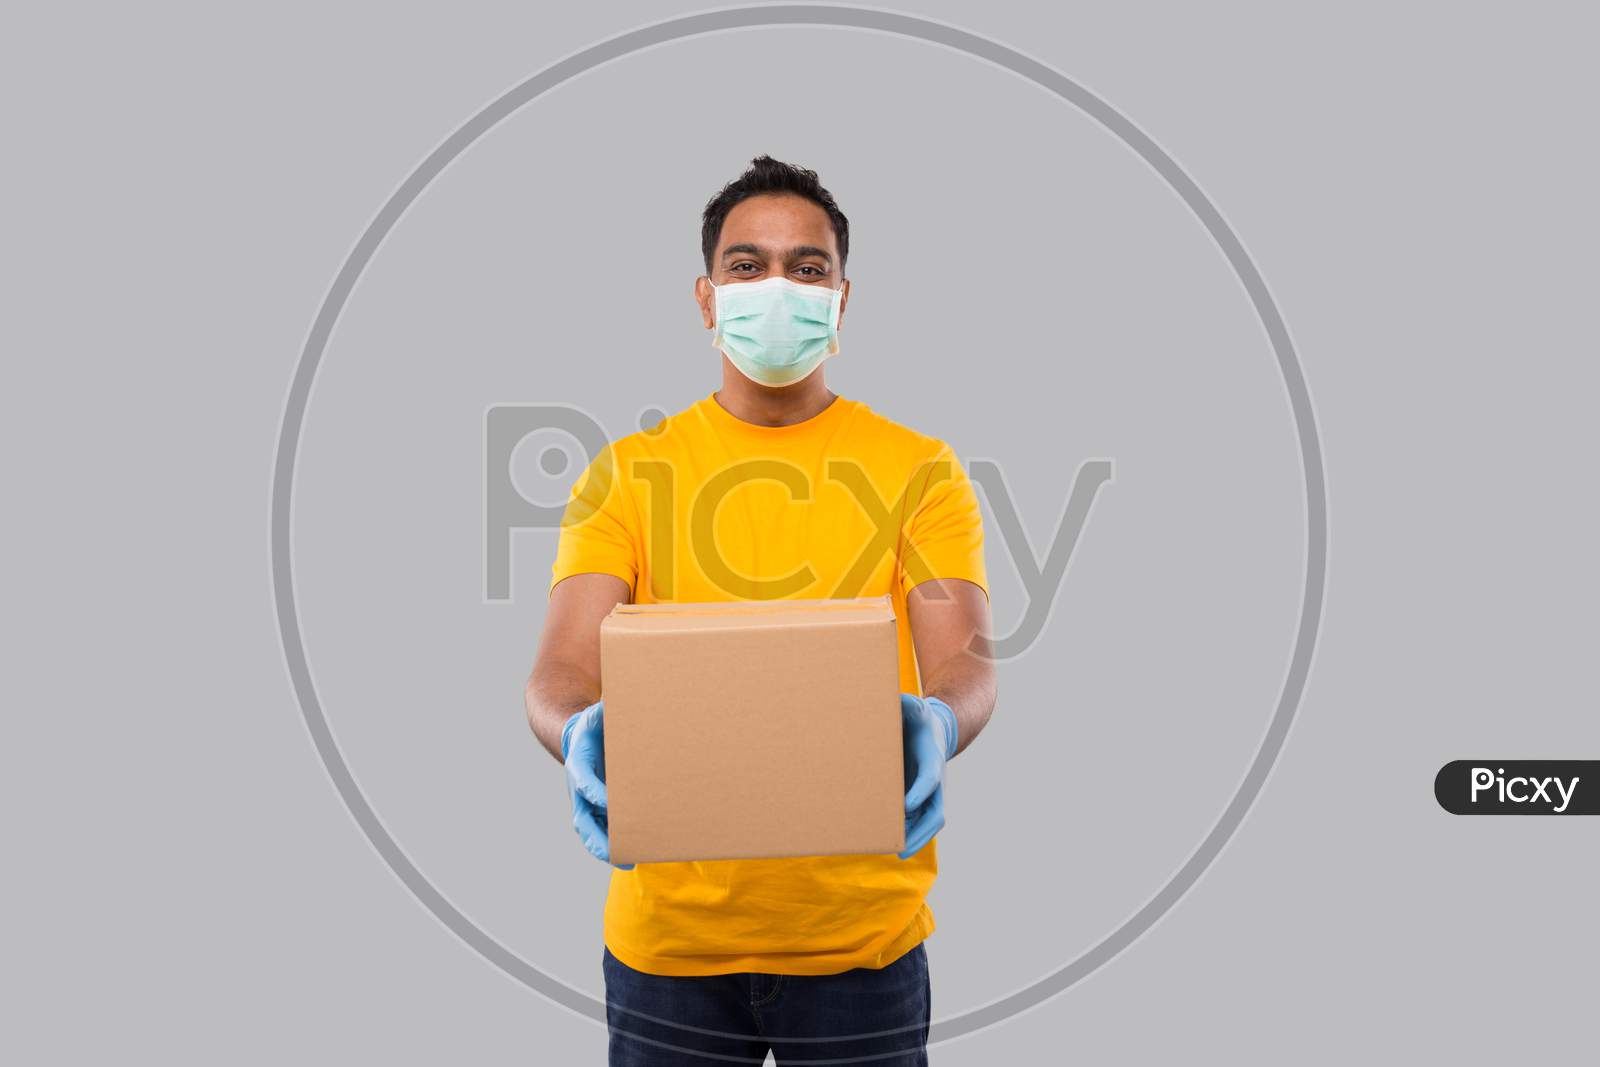 Indian Man With Box In Hands Wearing Medical Mask And Gloves Isolated. Yellow Tshirt Delivery Boy. Home Delivery. Quarantine Hero. Man Smiling